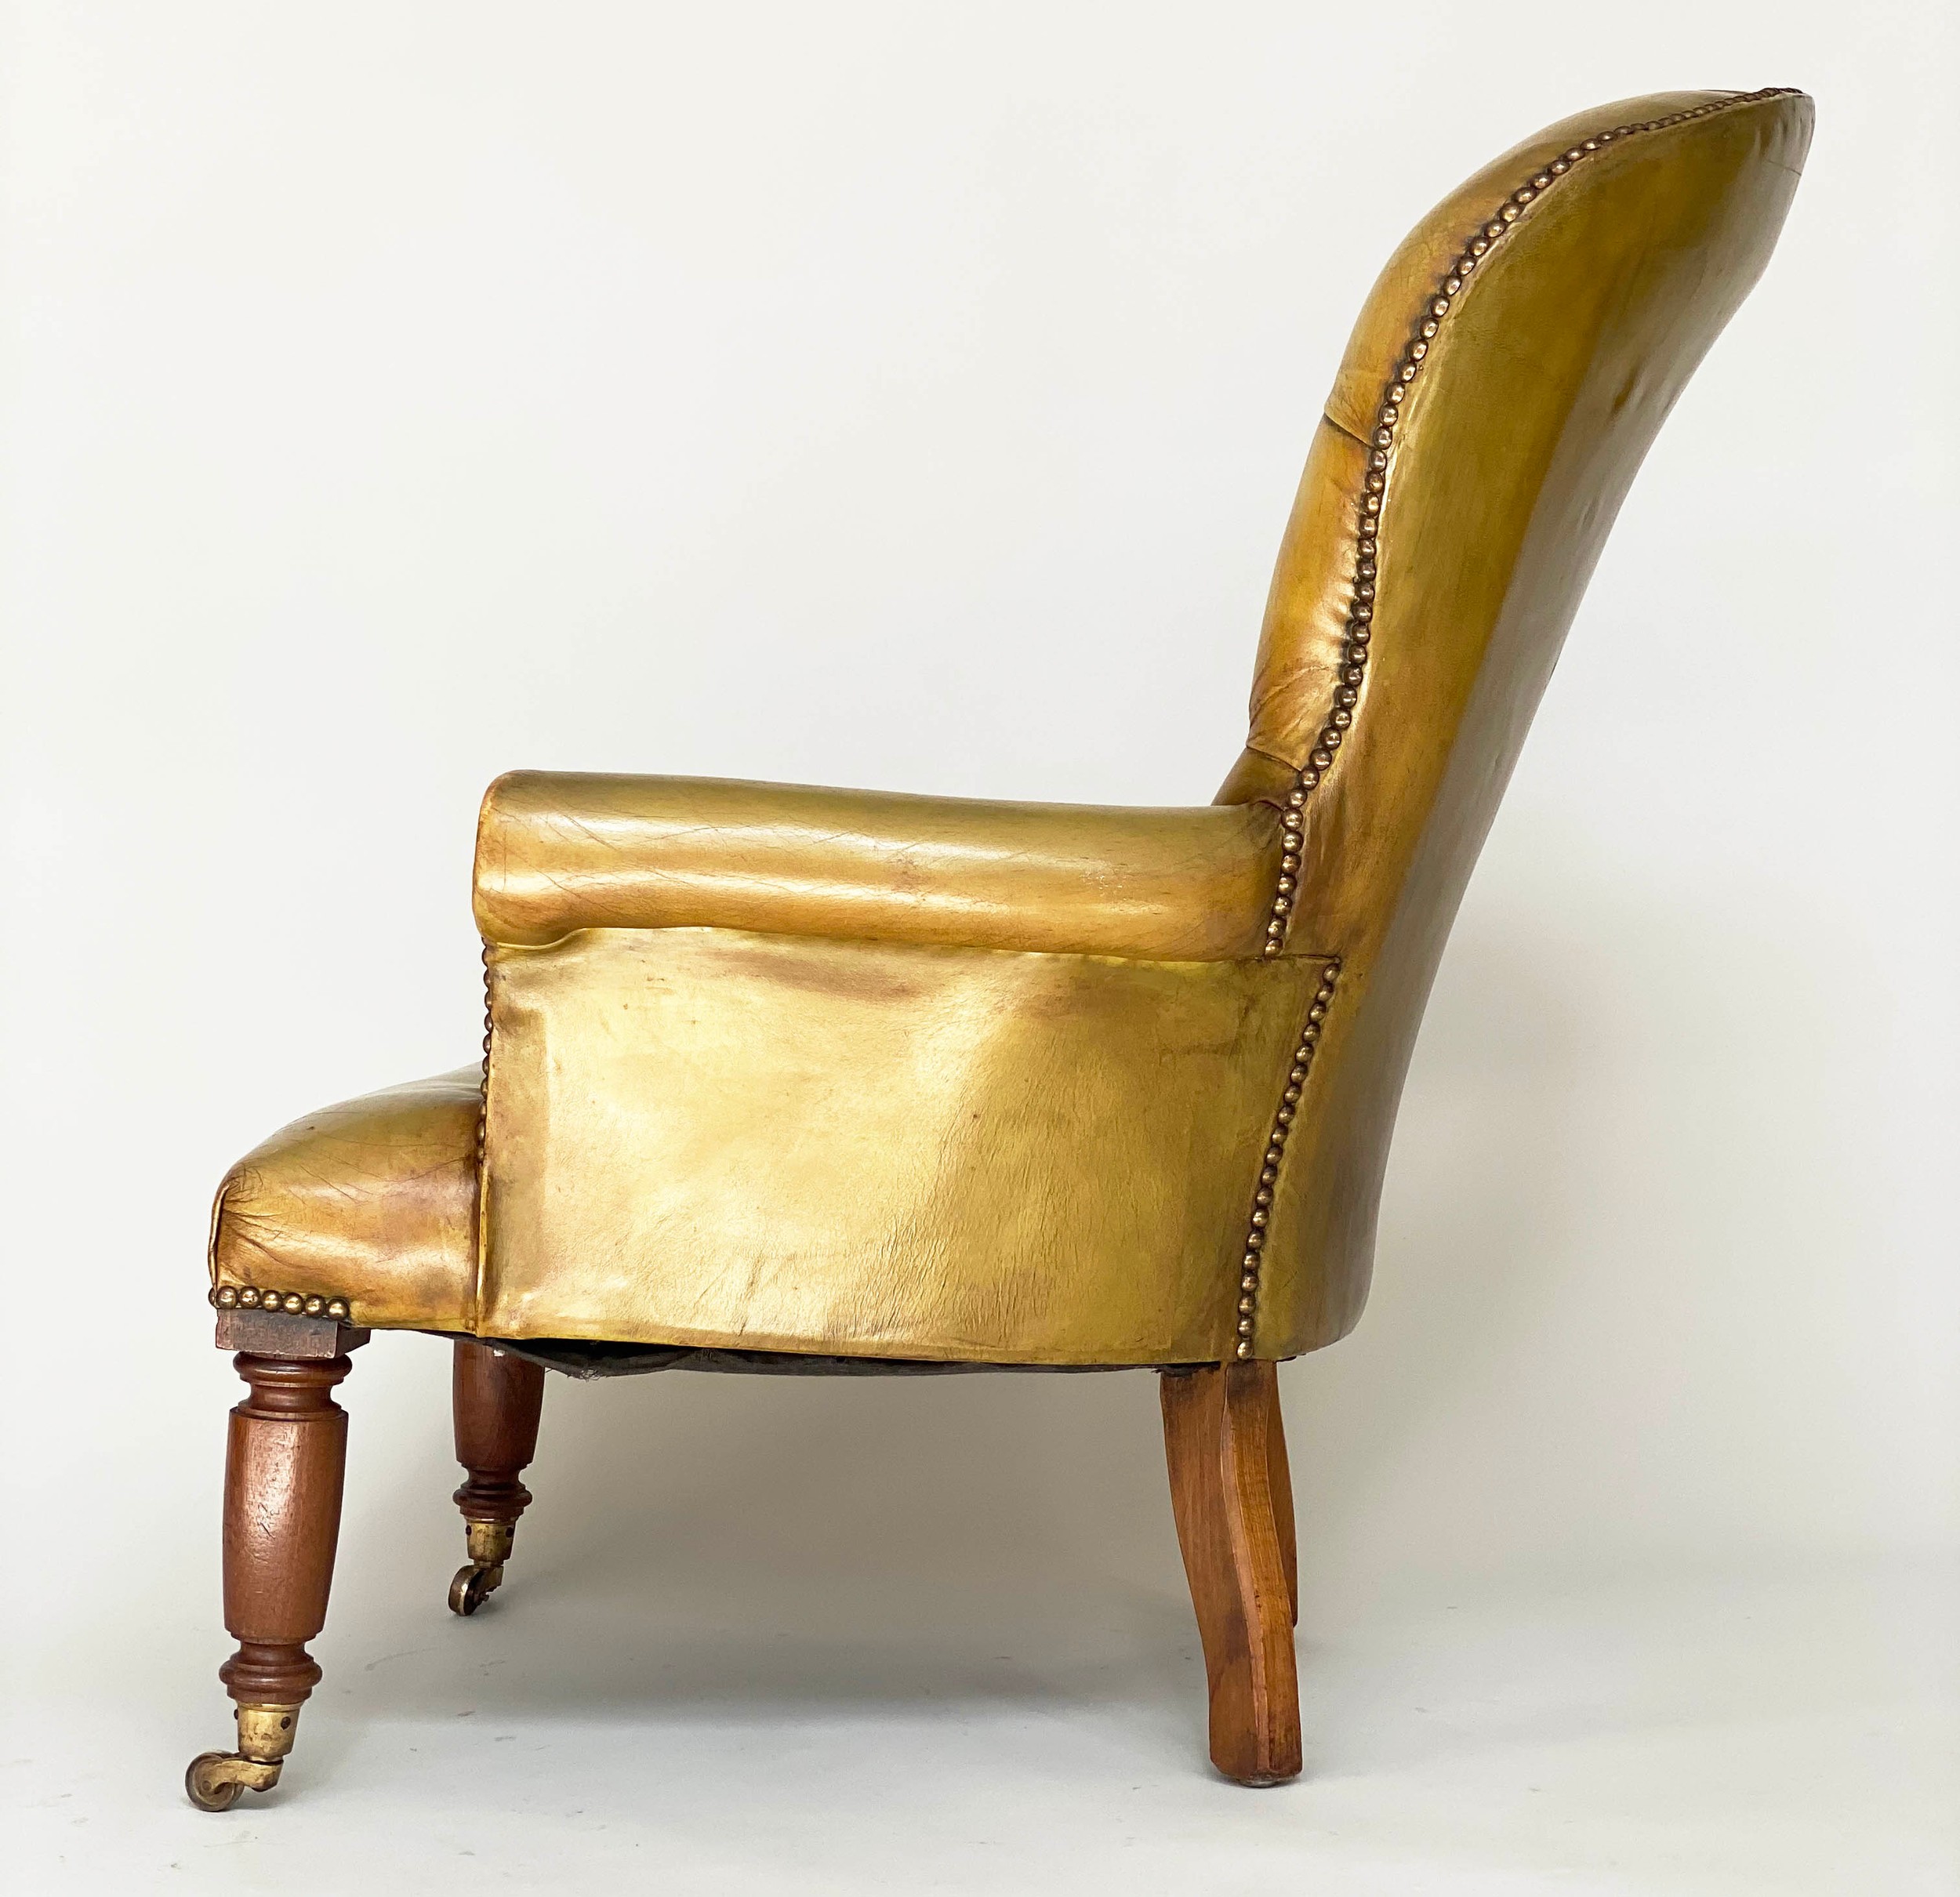 LIBRARY ARMCHAIR, Edwardian mahogany with brass studded and deep buttoned green leather upholstery - Image 2 of 10